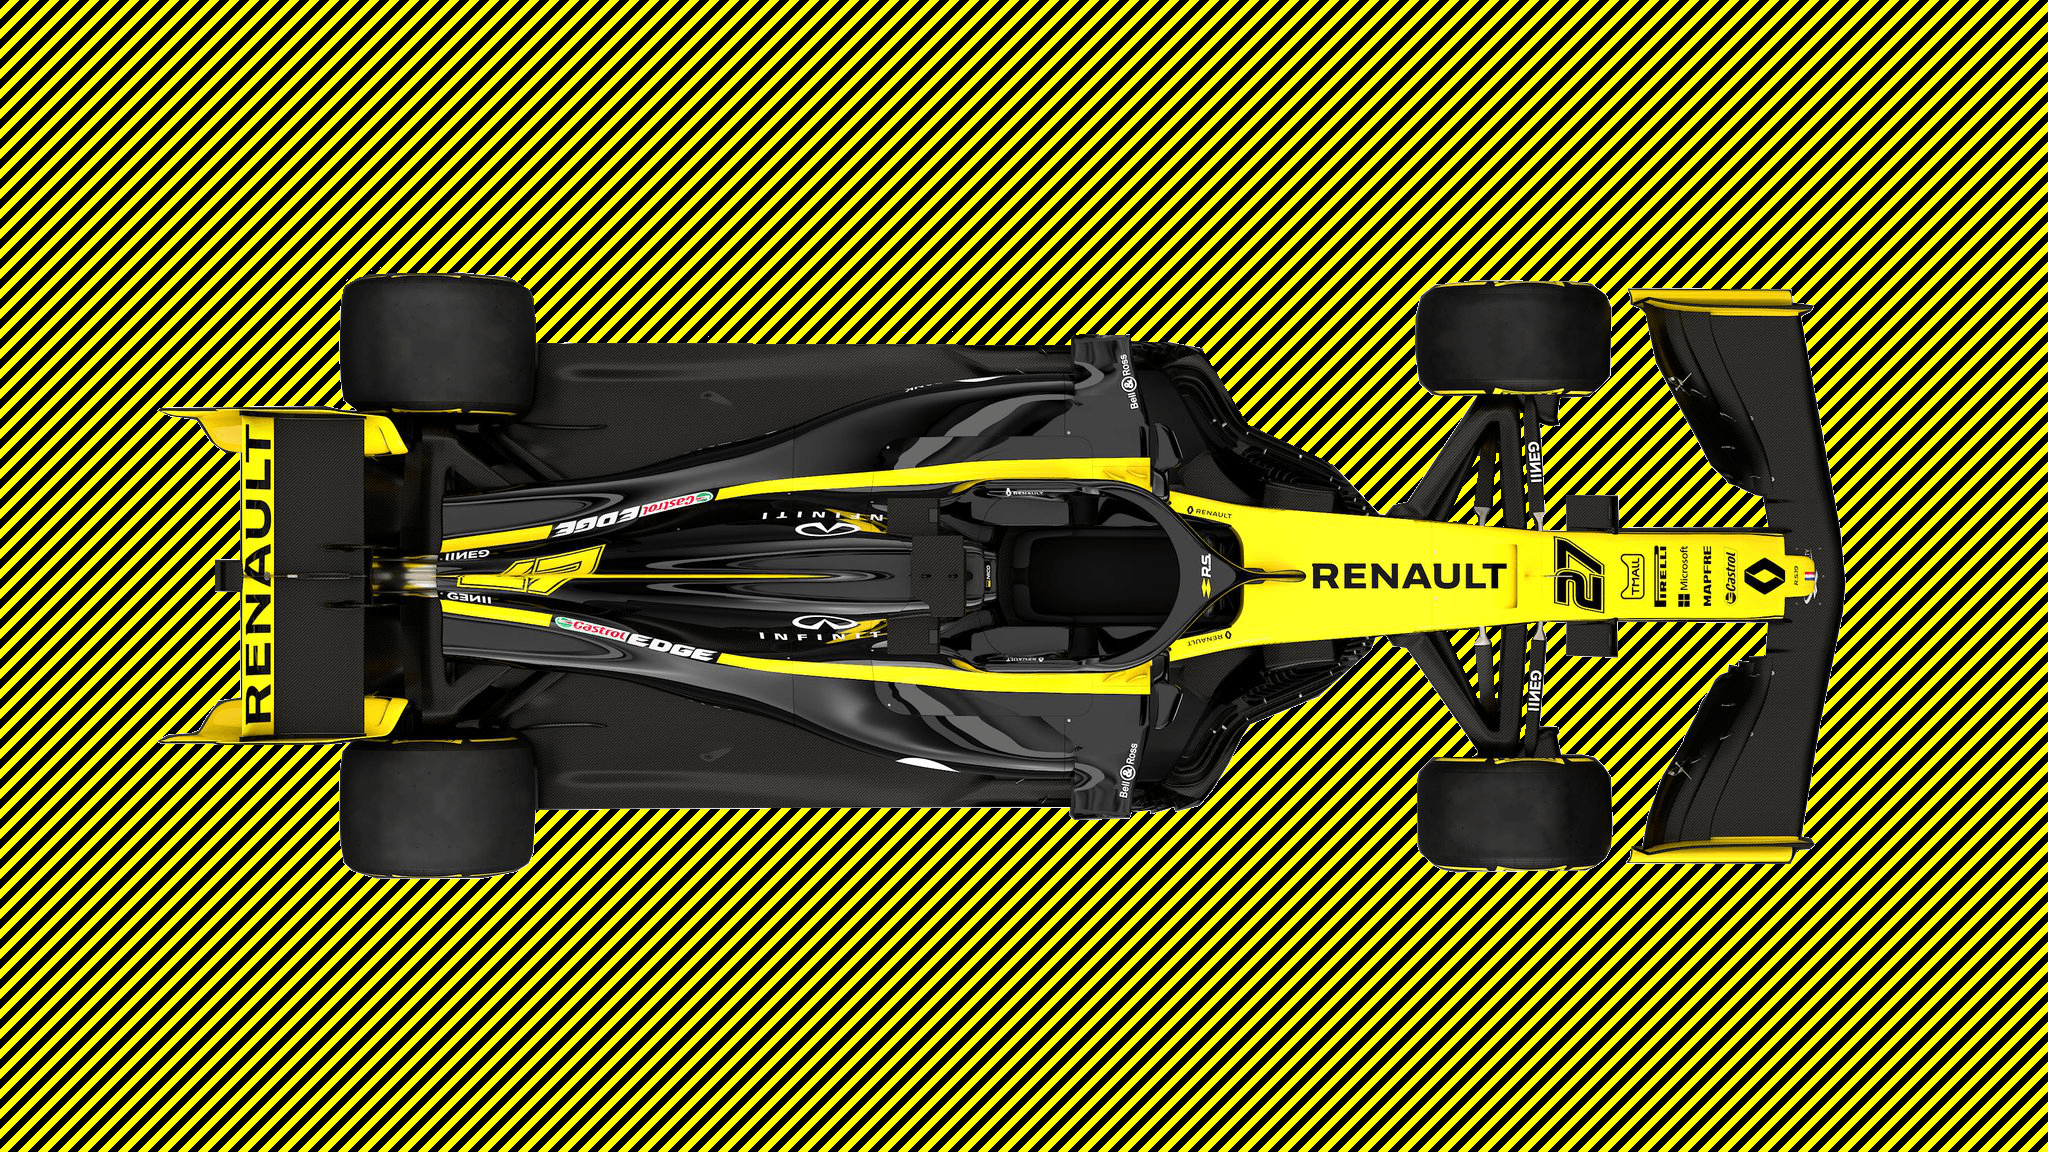 Quick edit of Renault R.S. 19 for a wallpaper please hire me as